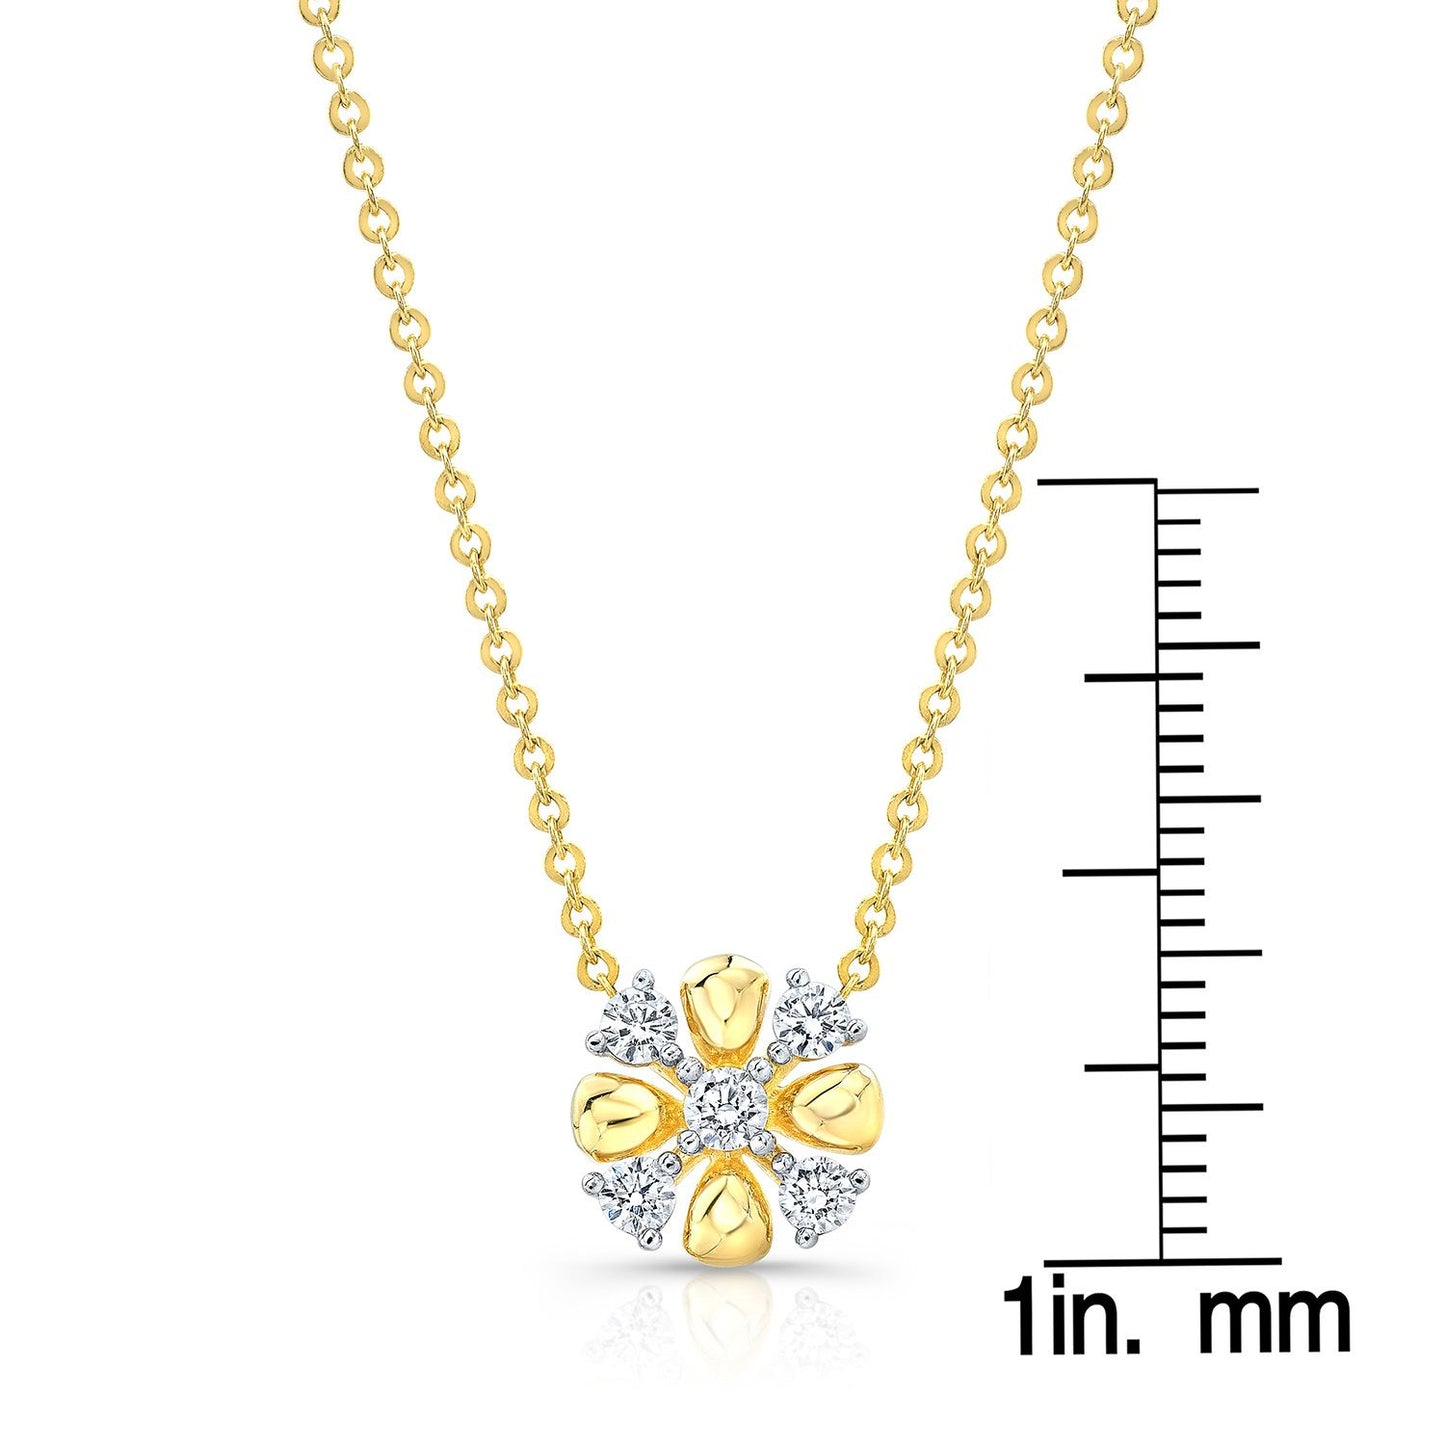 Diamond 4-cross Necklace With High-polish Accent In 14k Yellow Gold, 16-18 Inch